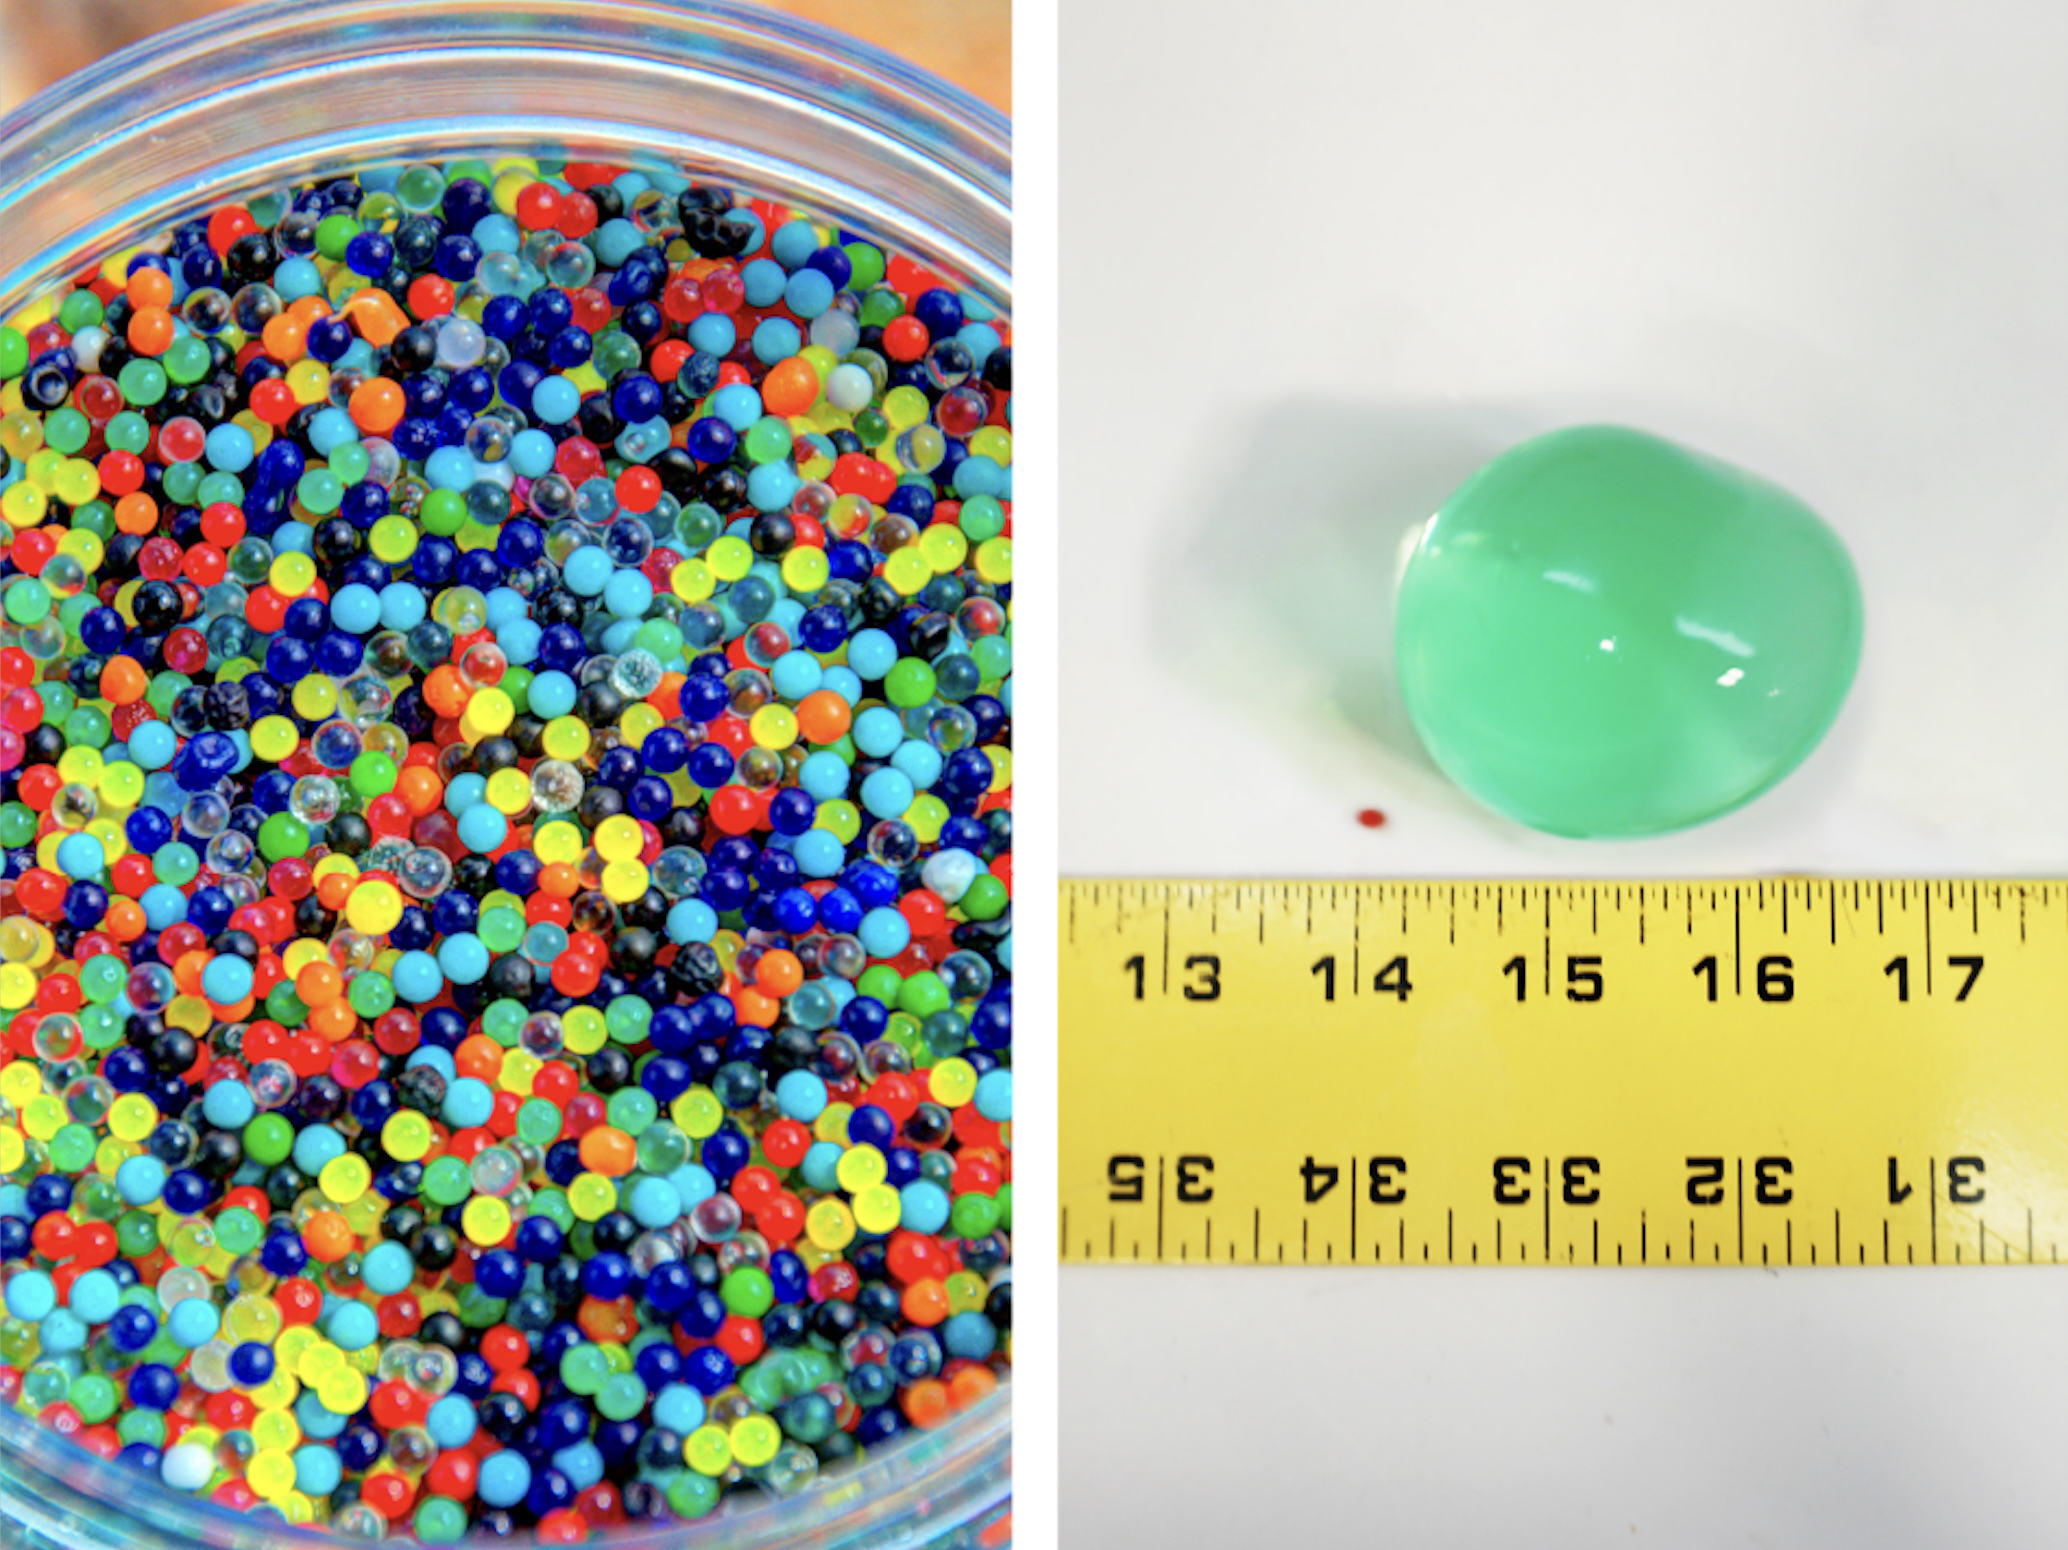  Target, Walmart to Stop Selling Water Beads Marketed to Children